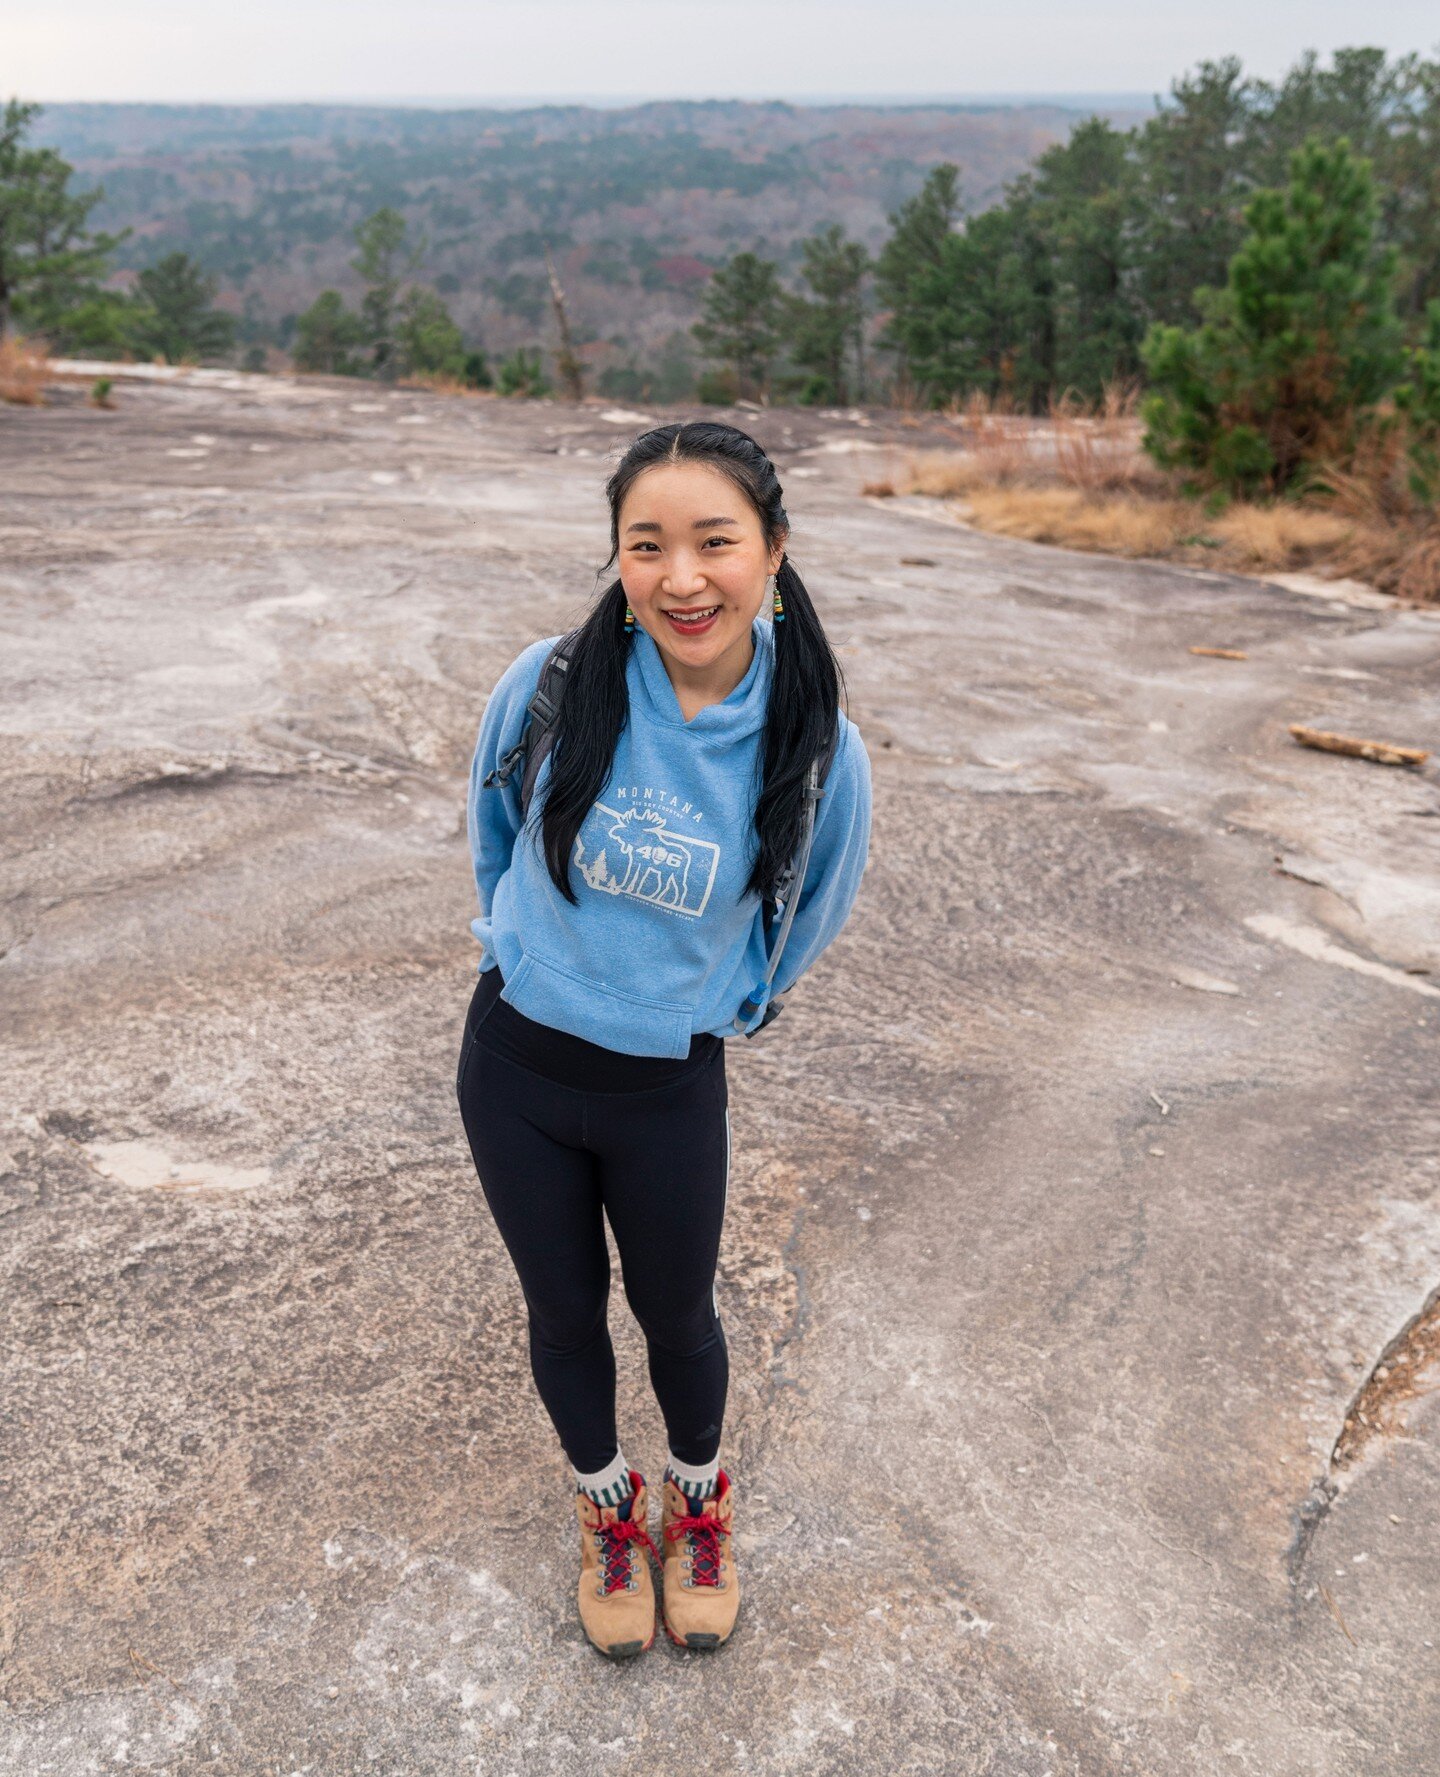 If we are hiking this girl is happy! 🤩 when we got to the top of Stone Mountain we tried a Yahoooooo but nothing came back hahah
.
.
.
Subject @minjikim.archi 
.⁠
Image by @sethfjohnson
.⁠
&copy; Rabbit TraX⁠
.⁠
.⁠
.⁠
.⁠
.⁠
#rabbittrax #overland #ov